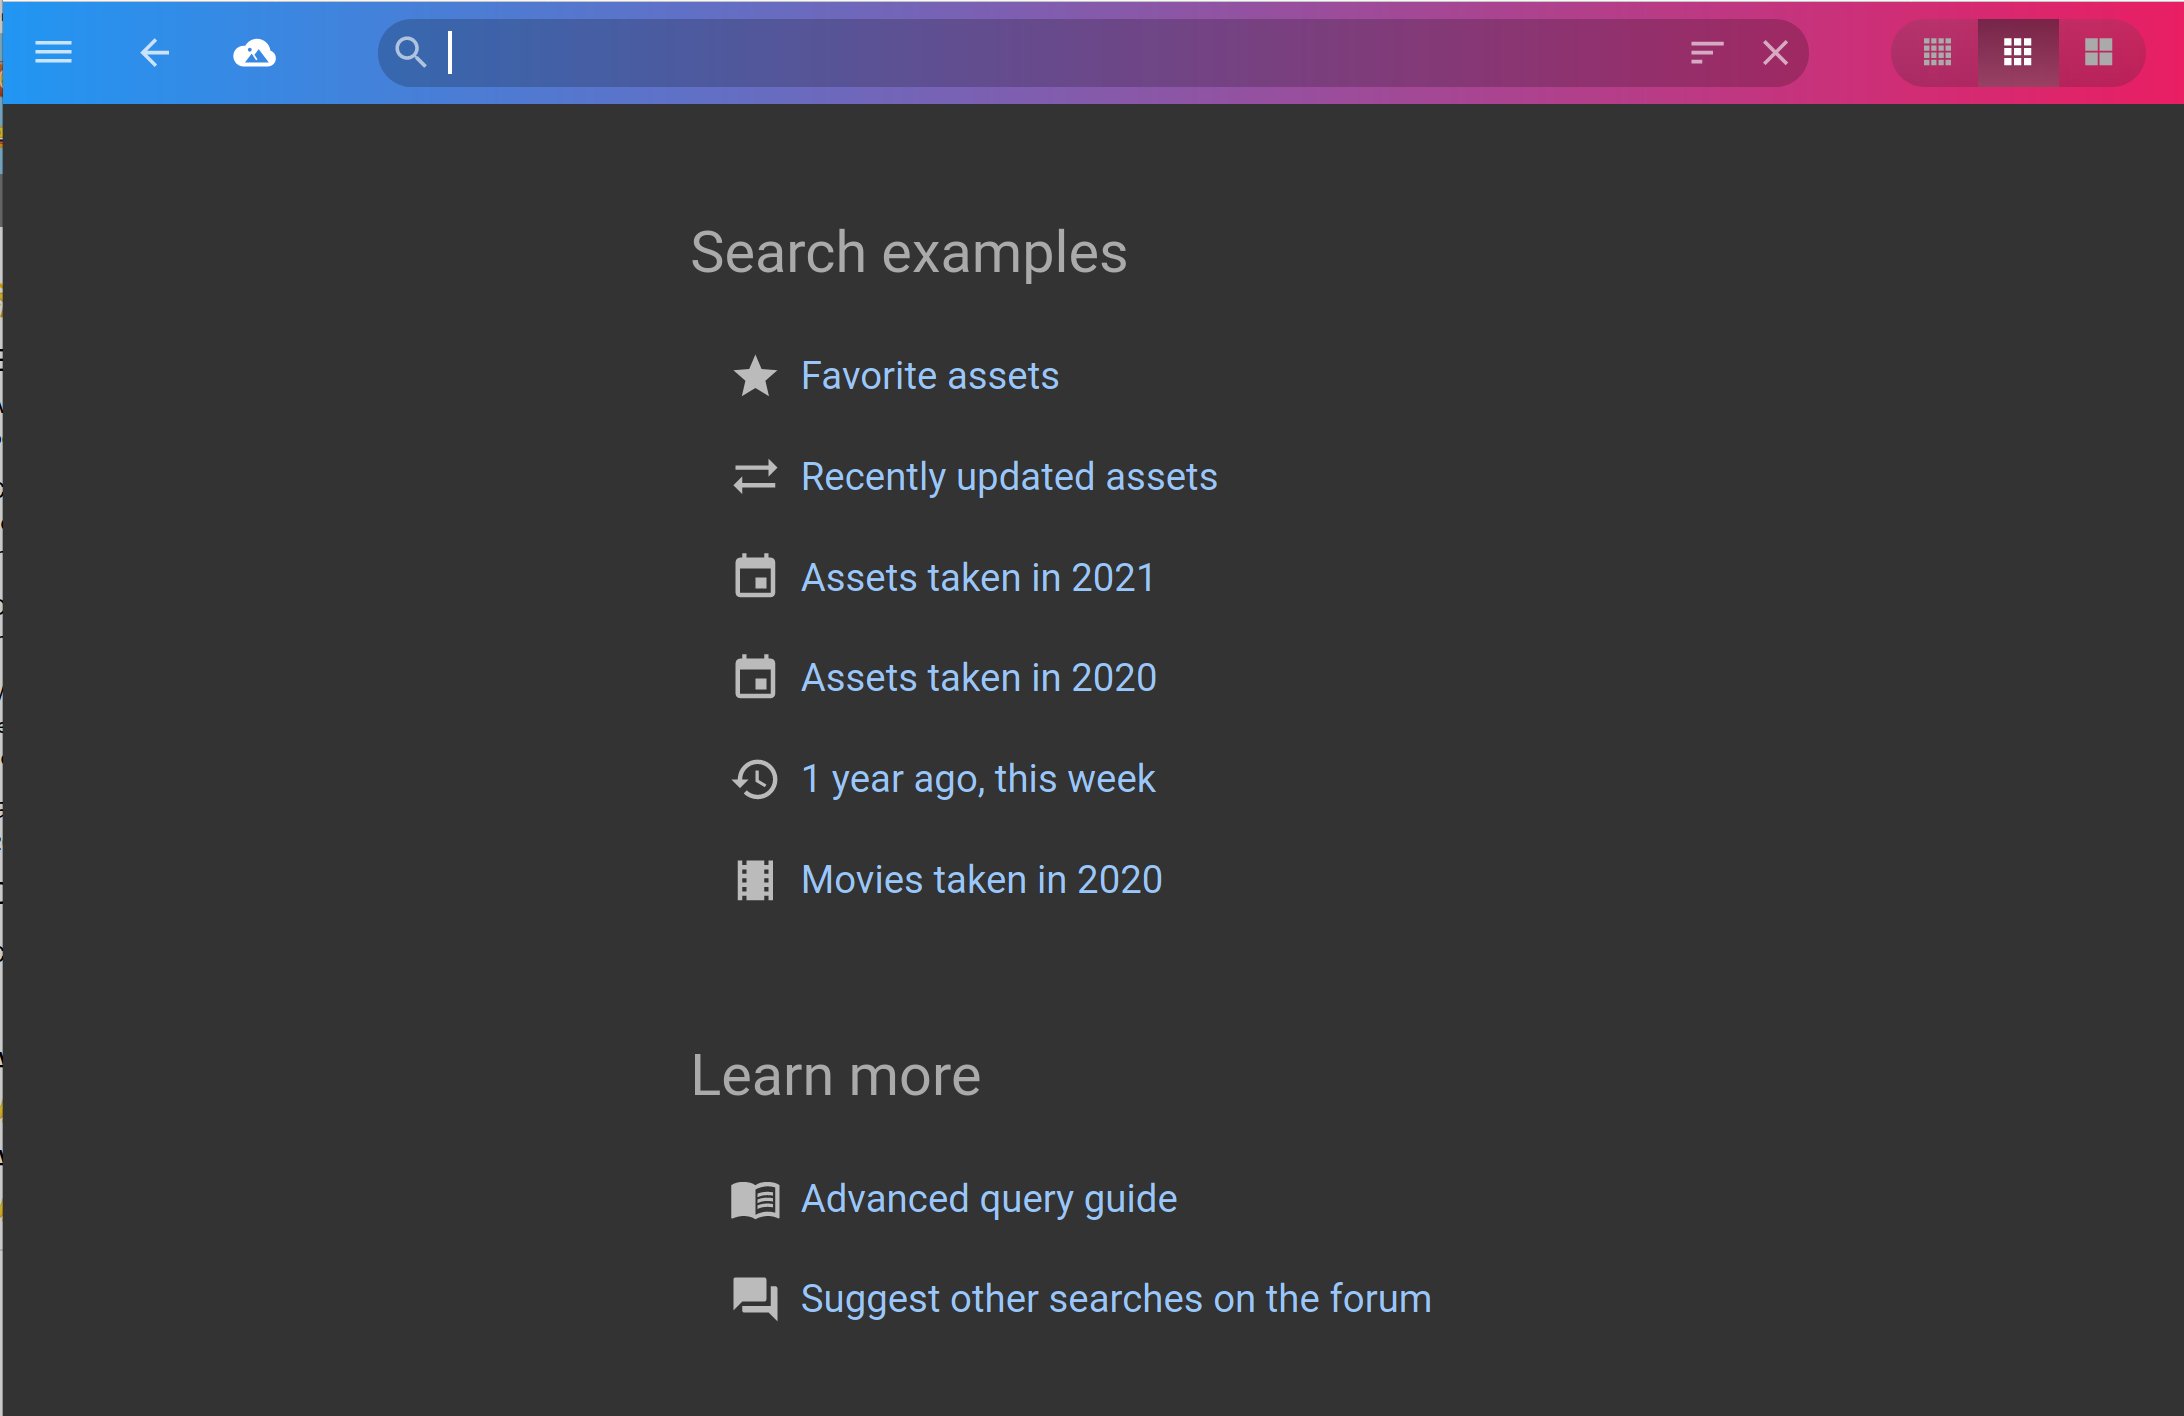 New search panel in v1.0